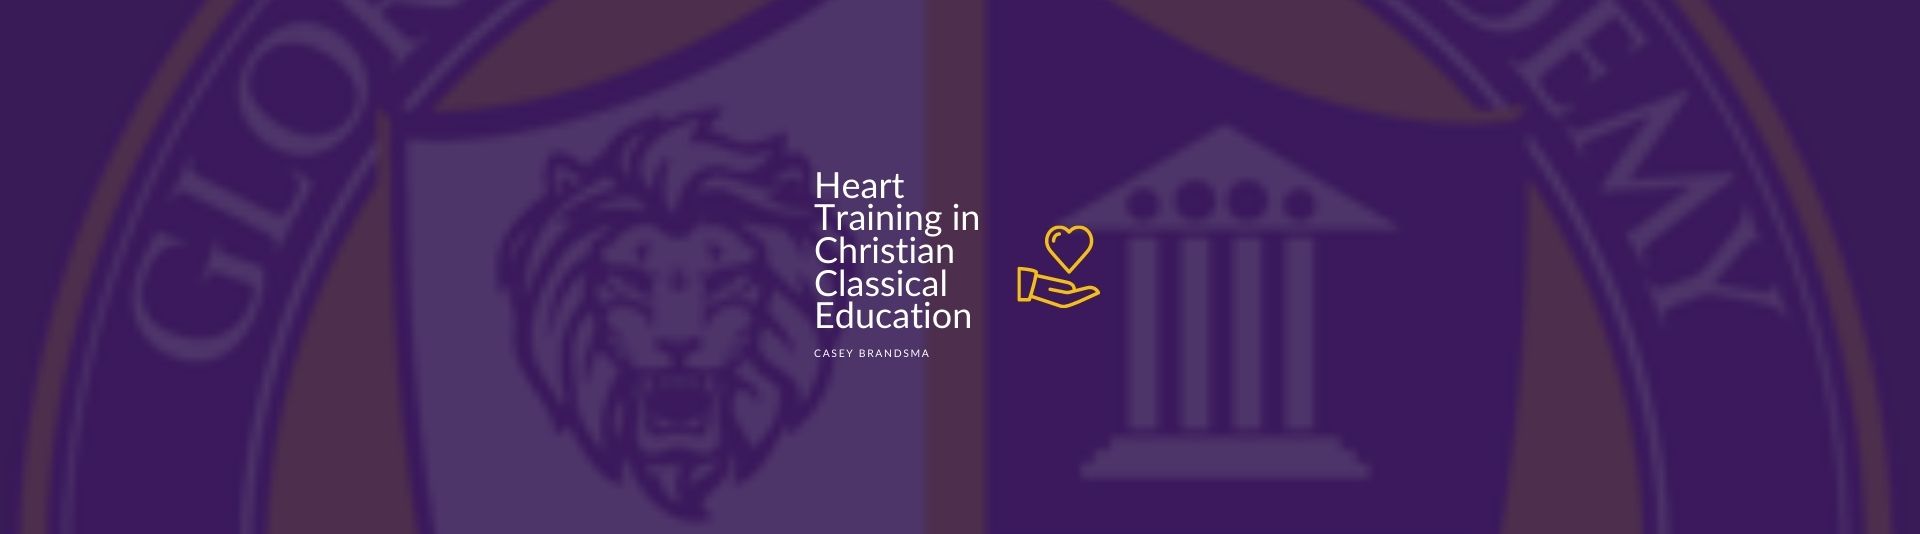 GDA Heart Training in Christian Classical Education